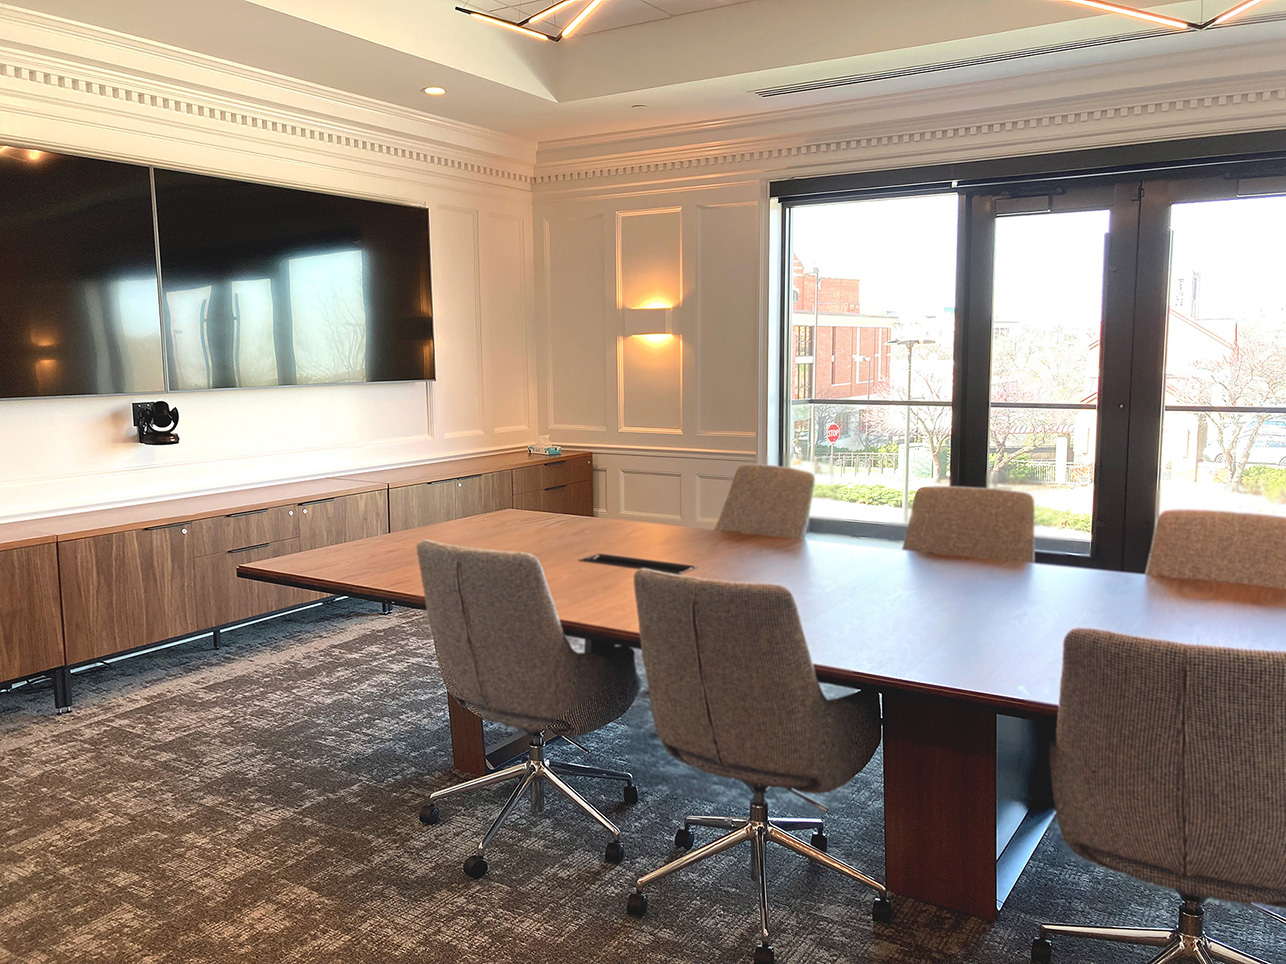 A long conference table, surrounded by office chairs on two sides, face two video monitors.